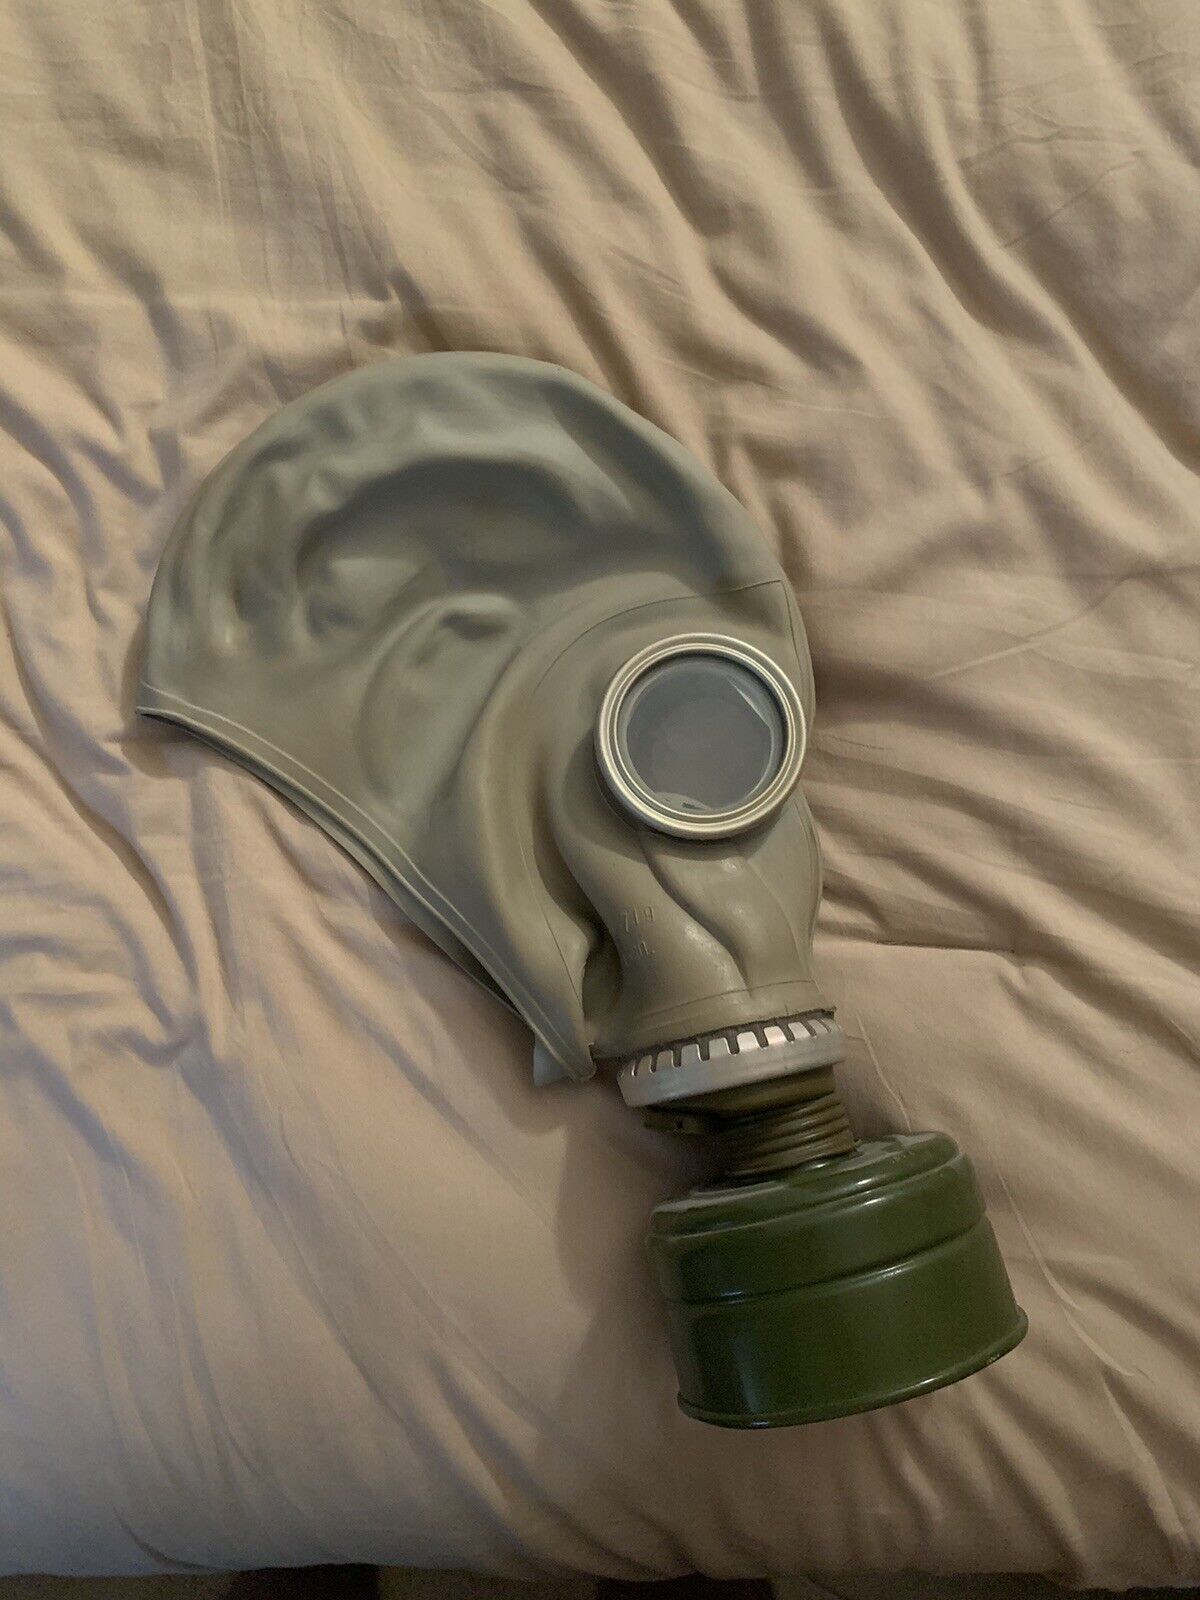 Soviet Russian Vintage Gas Mask with Filter